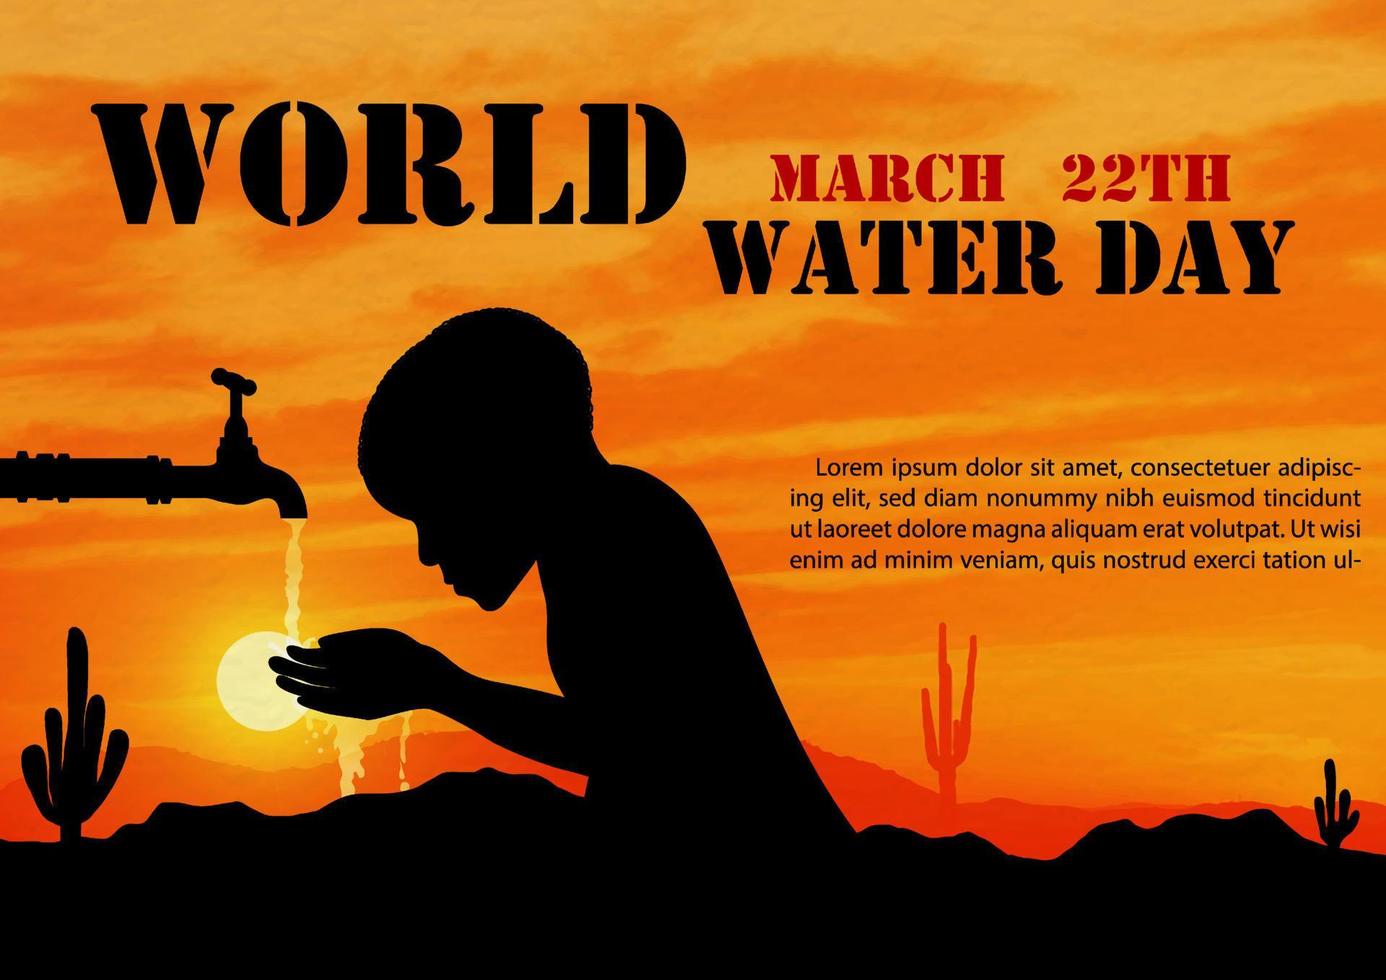 Silhouette of African children's drinking water tap with world water day wording and example texts on sunset desert landscape view background. vector